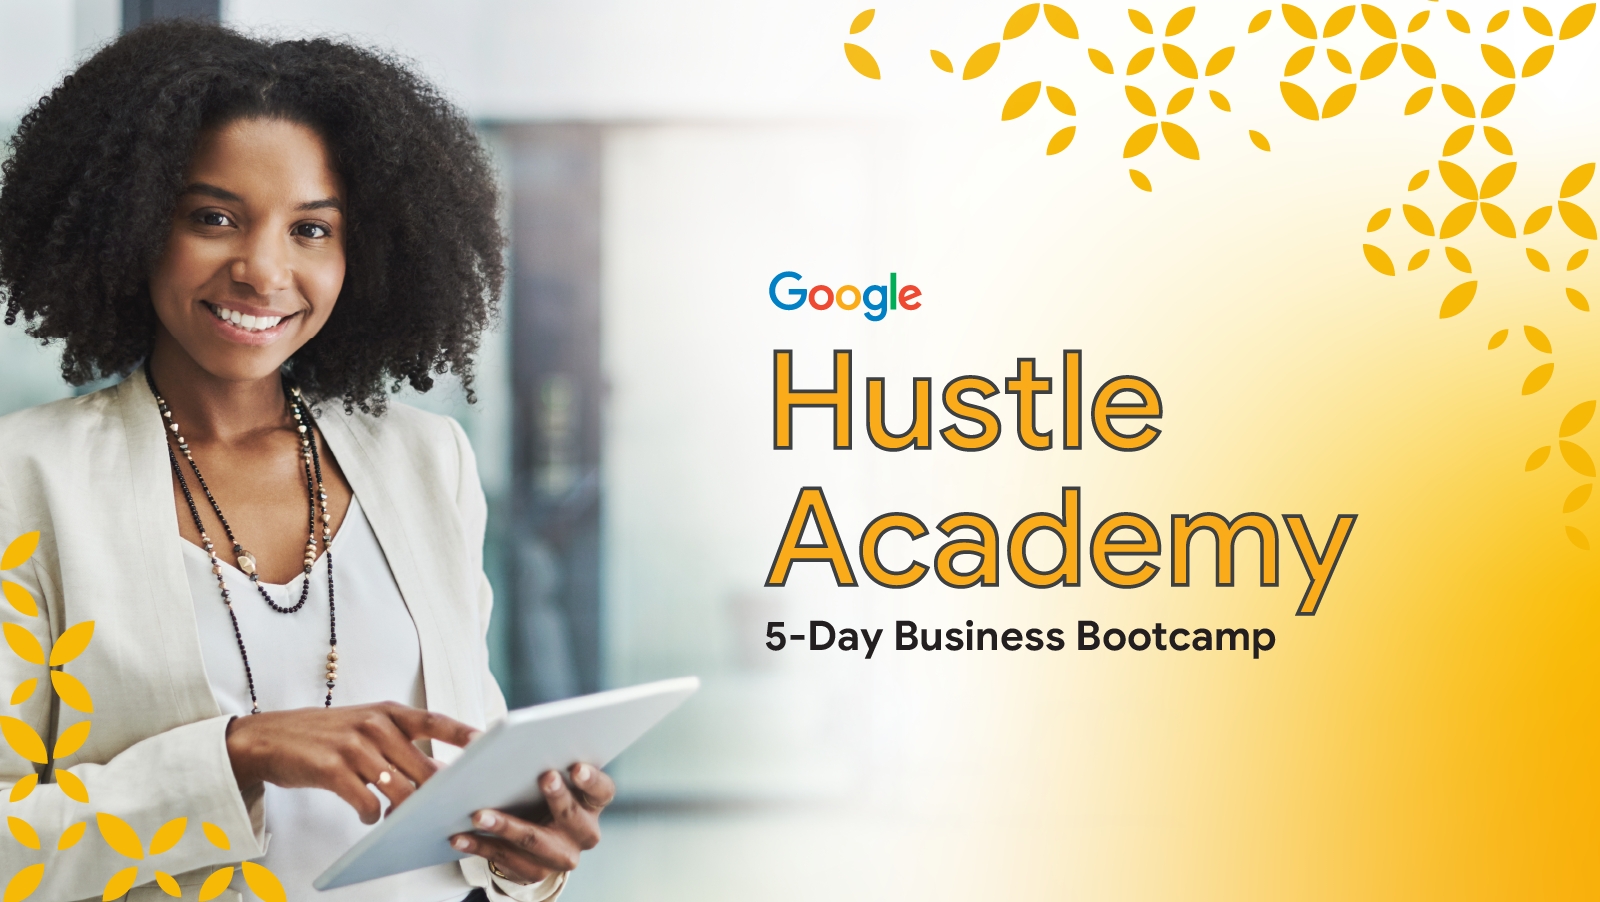 Google Hustle Academy empowers African SMBs with AI